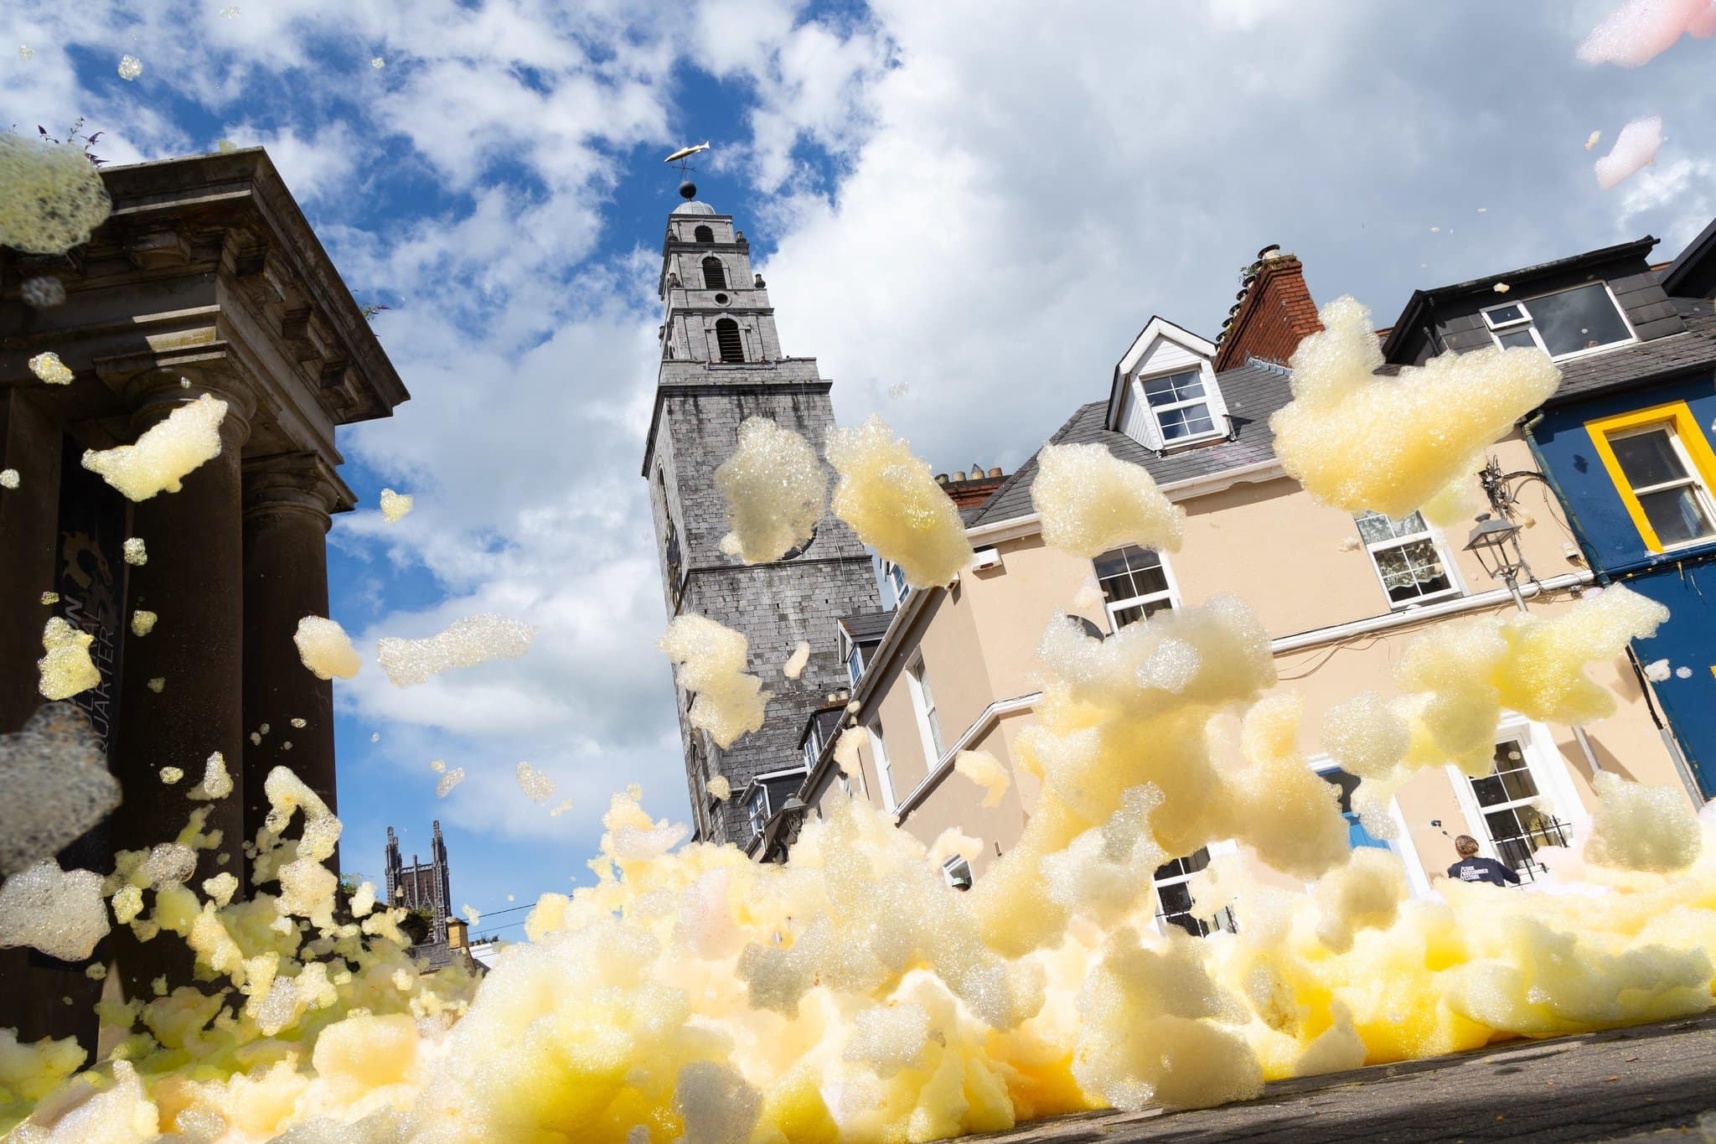 Cork Midsummer Festival (photo by Jed Niezgoda) A view of a street looking up from the ground, buildings partially obscured by large clumps of yellow foam.